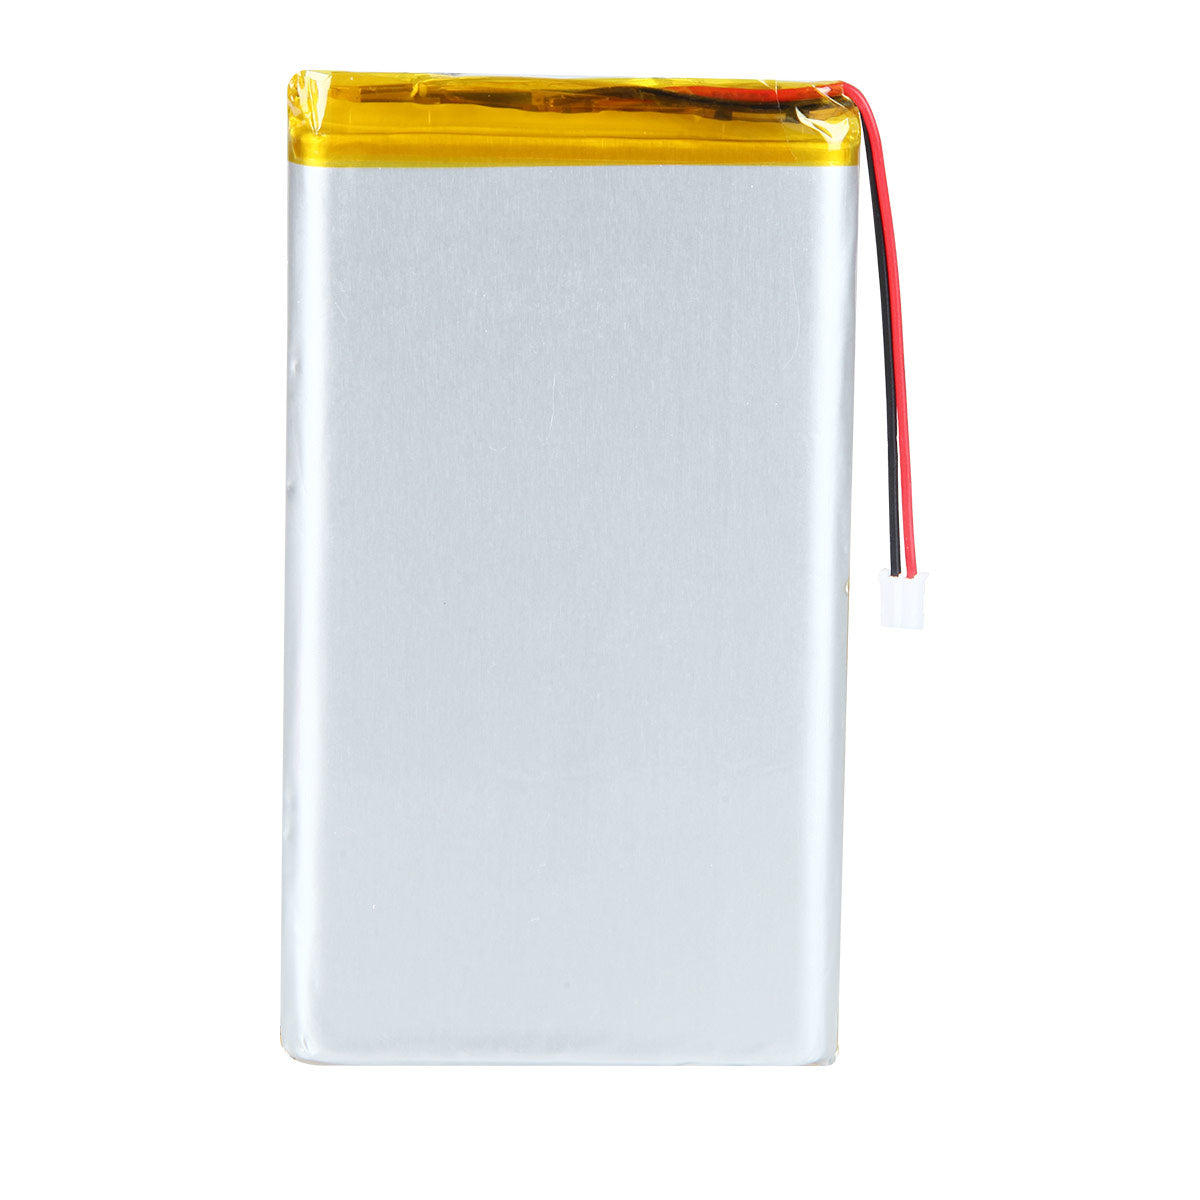 YDL 3.7V 10000mAh 1165114 Rechargeable Lithium Polymer Battery Length 116mm